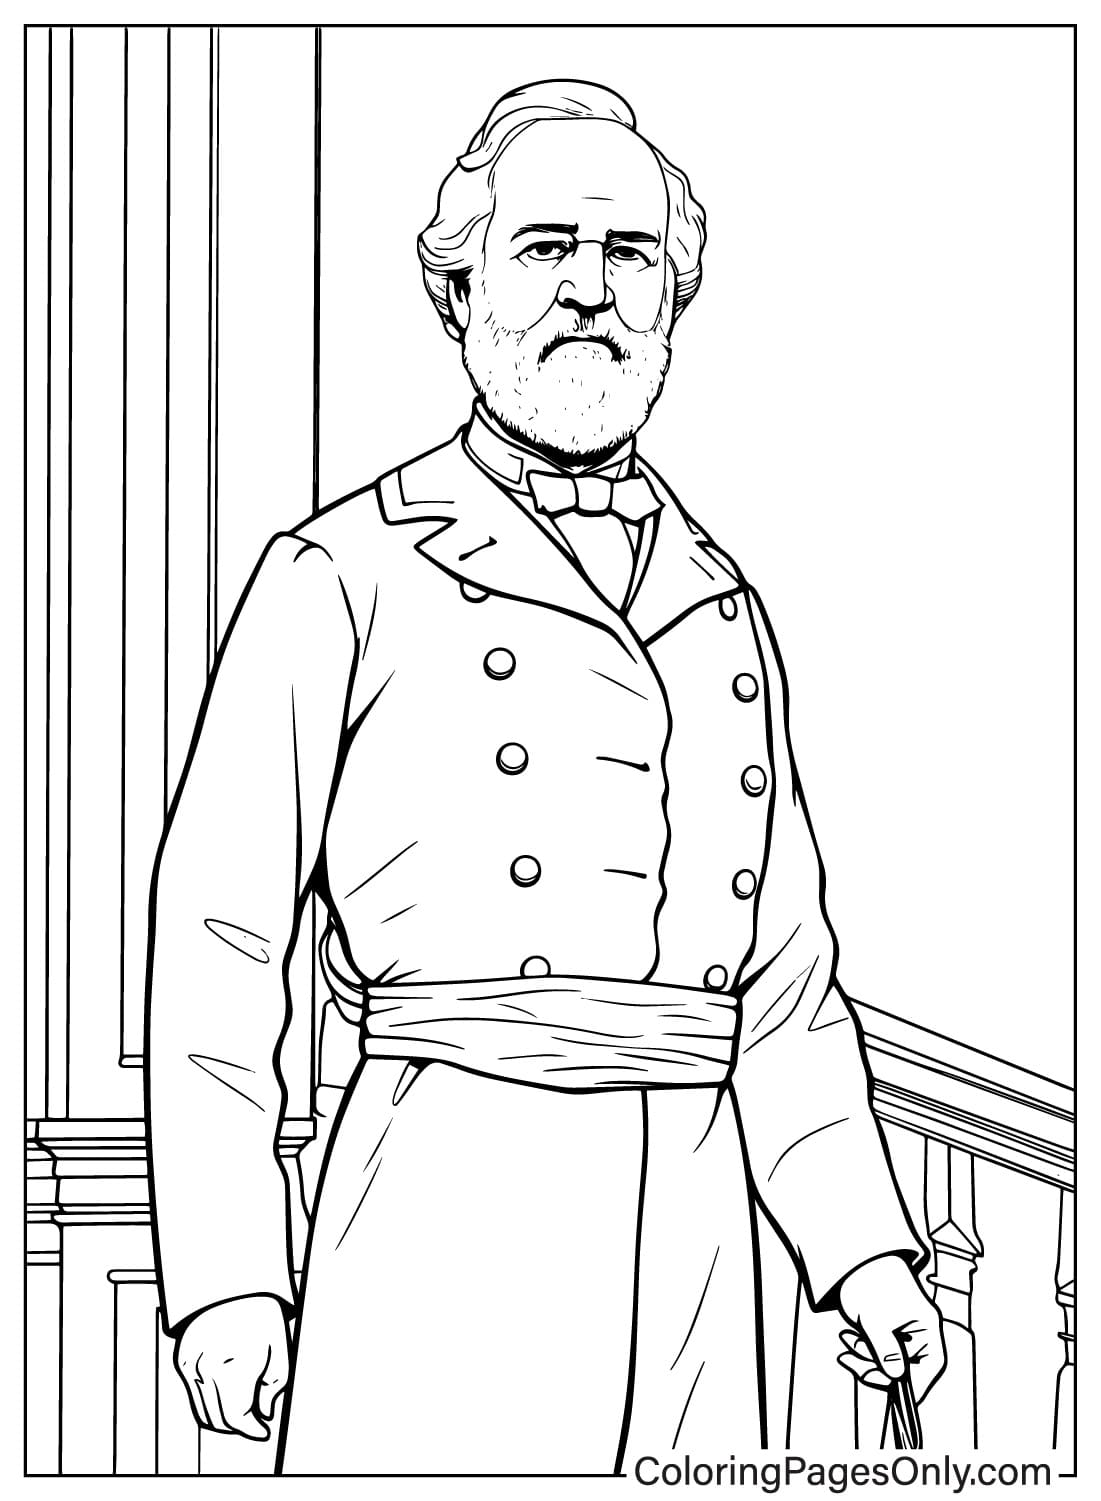 Coloring Page Robert E. Lee - Free Printable Coloring Pages